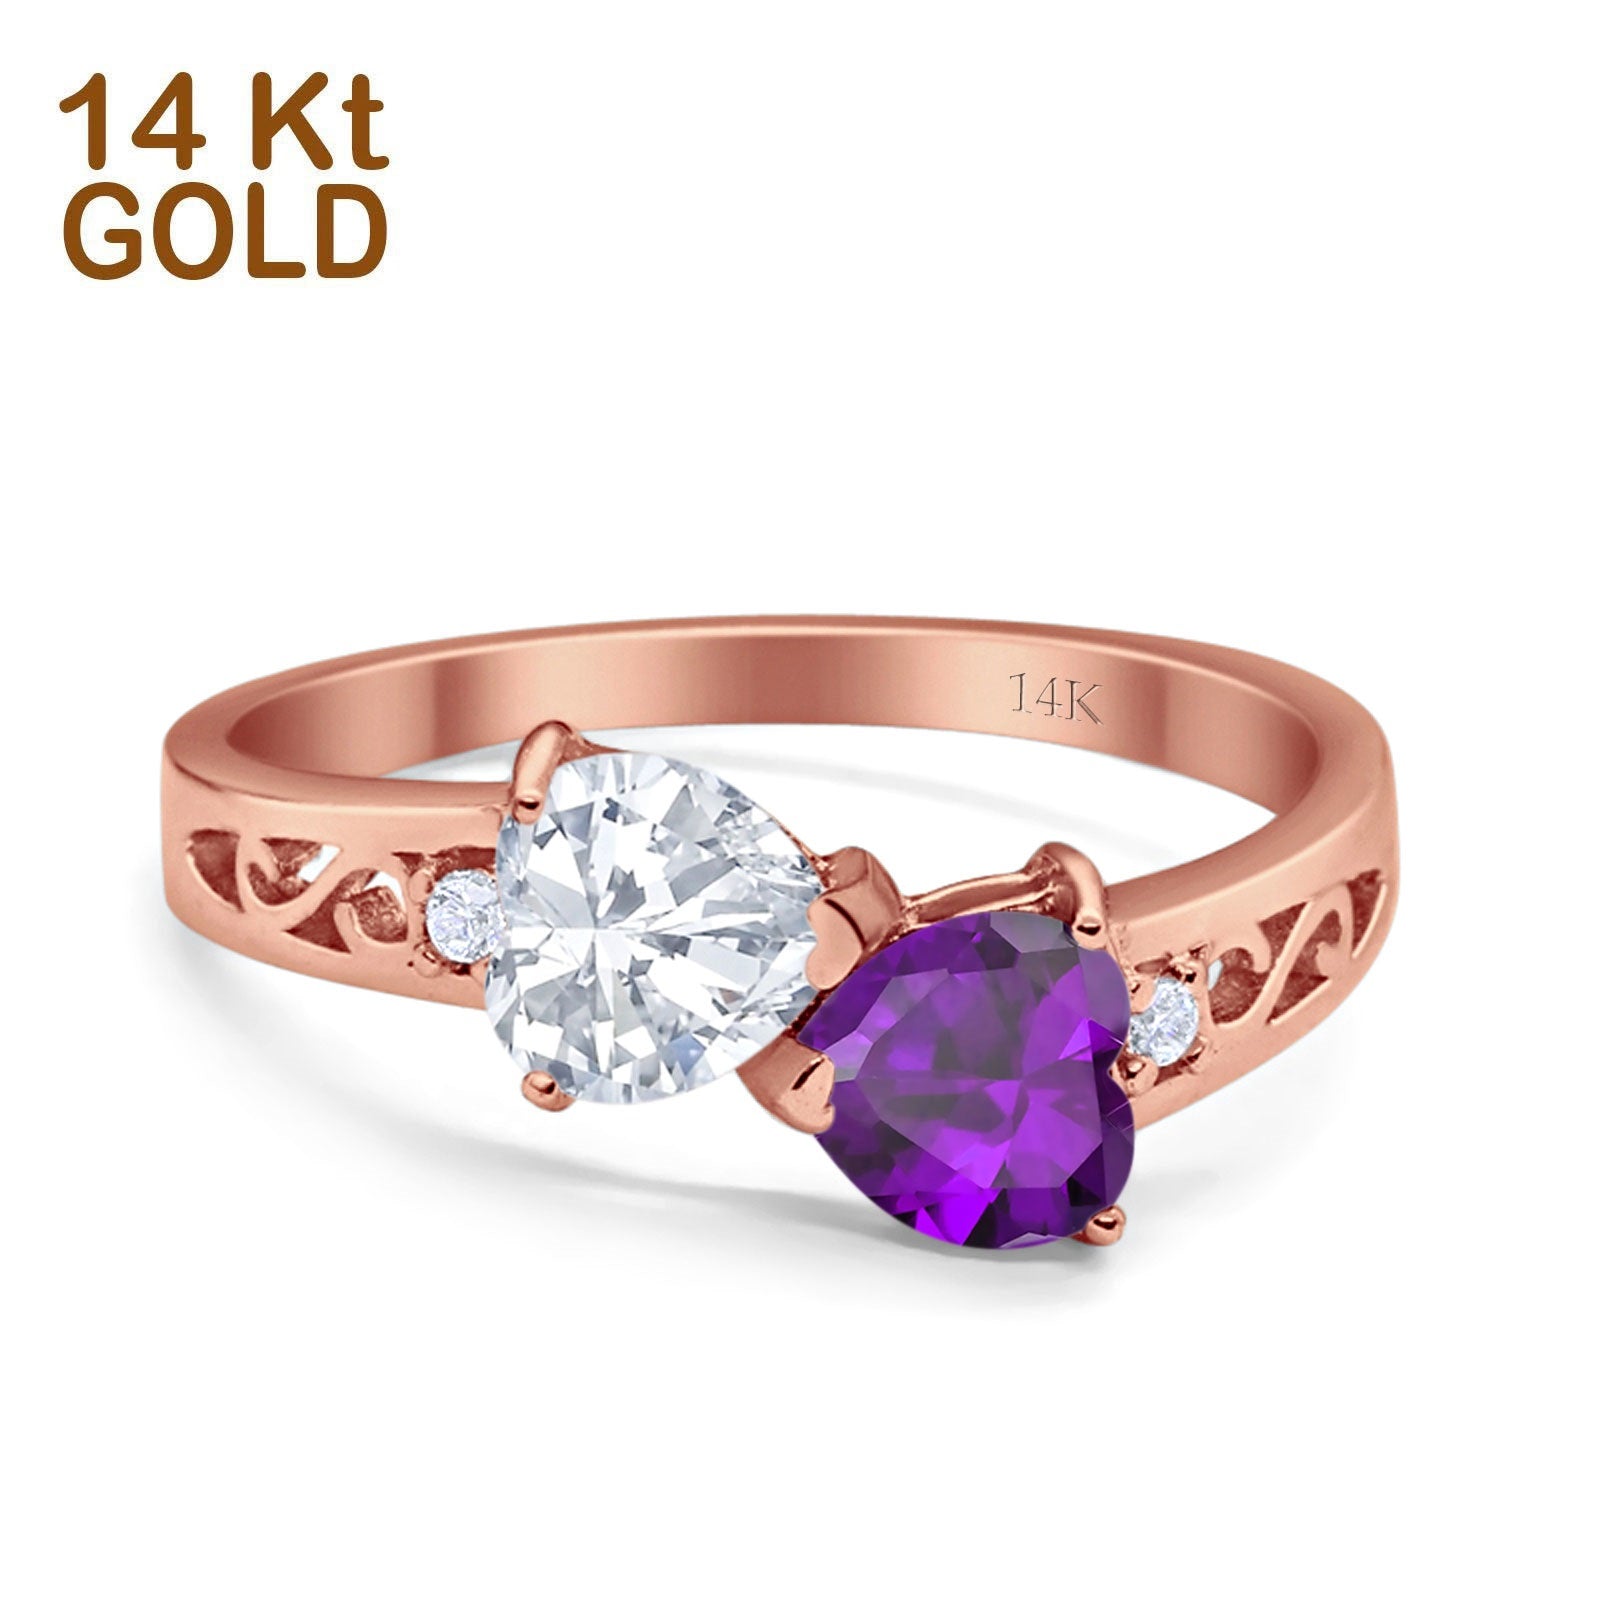 14K Gold Double Heart Simulated Cubic Zirconia Bridal Wedding Engagement Ring